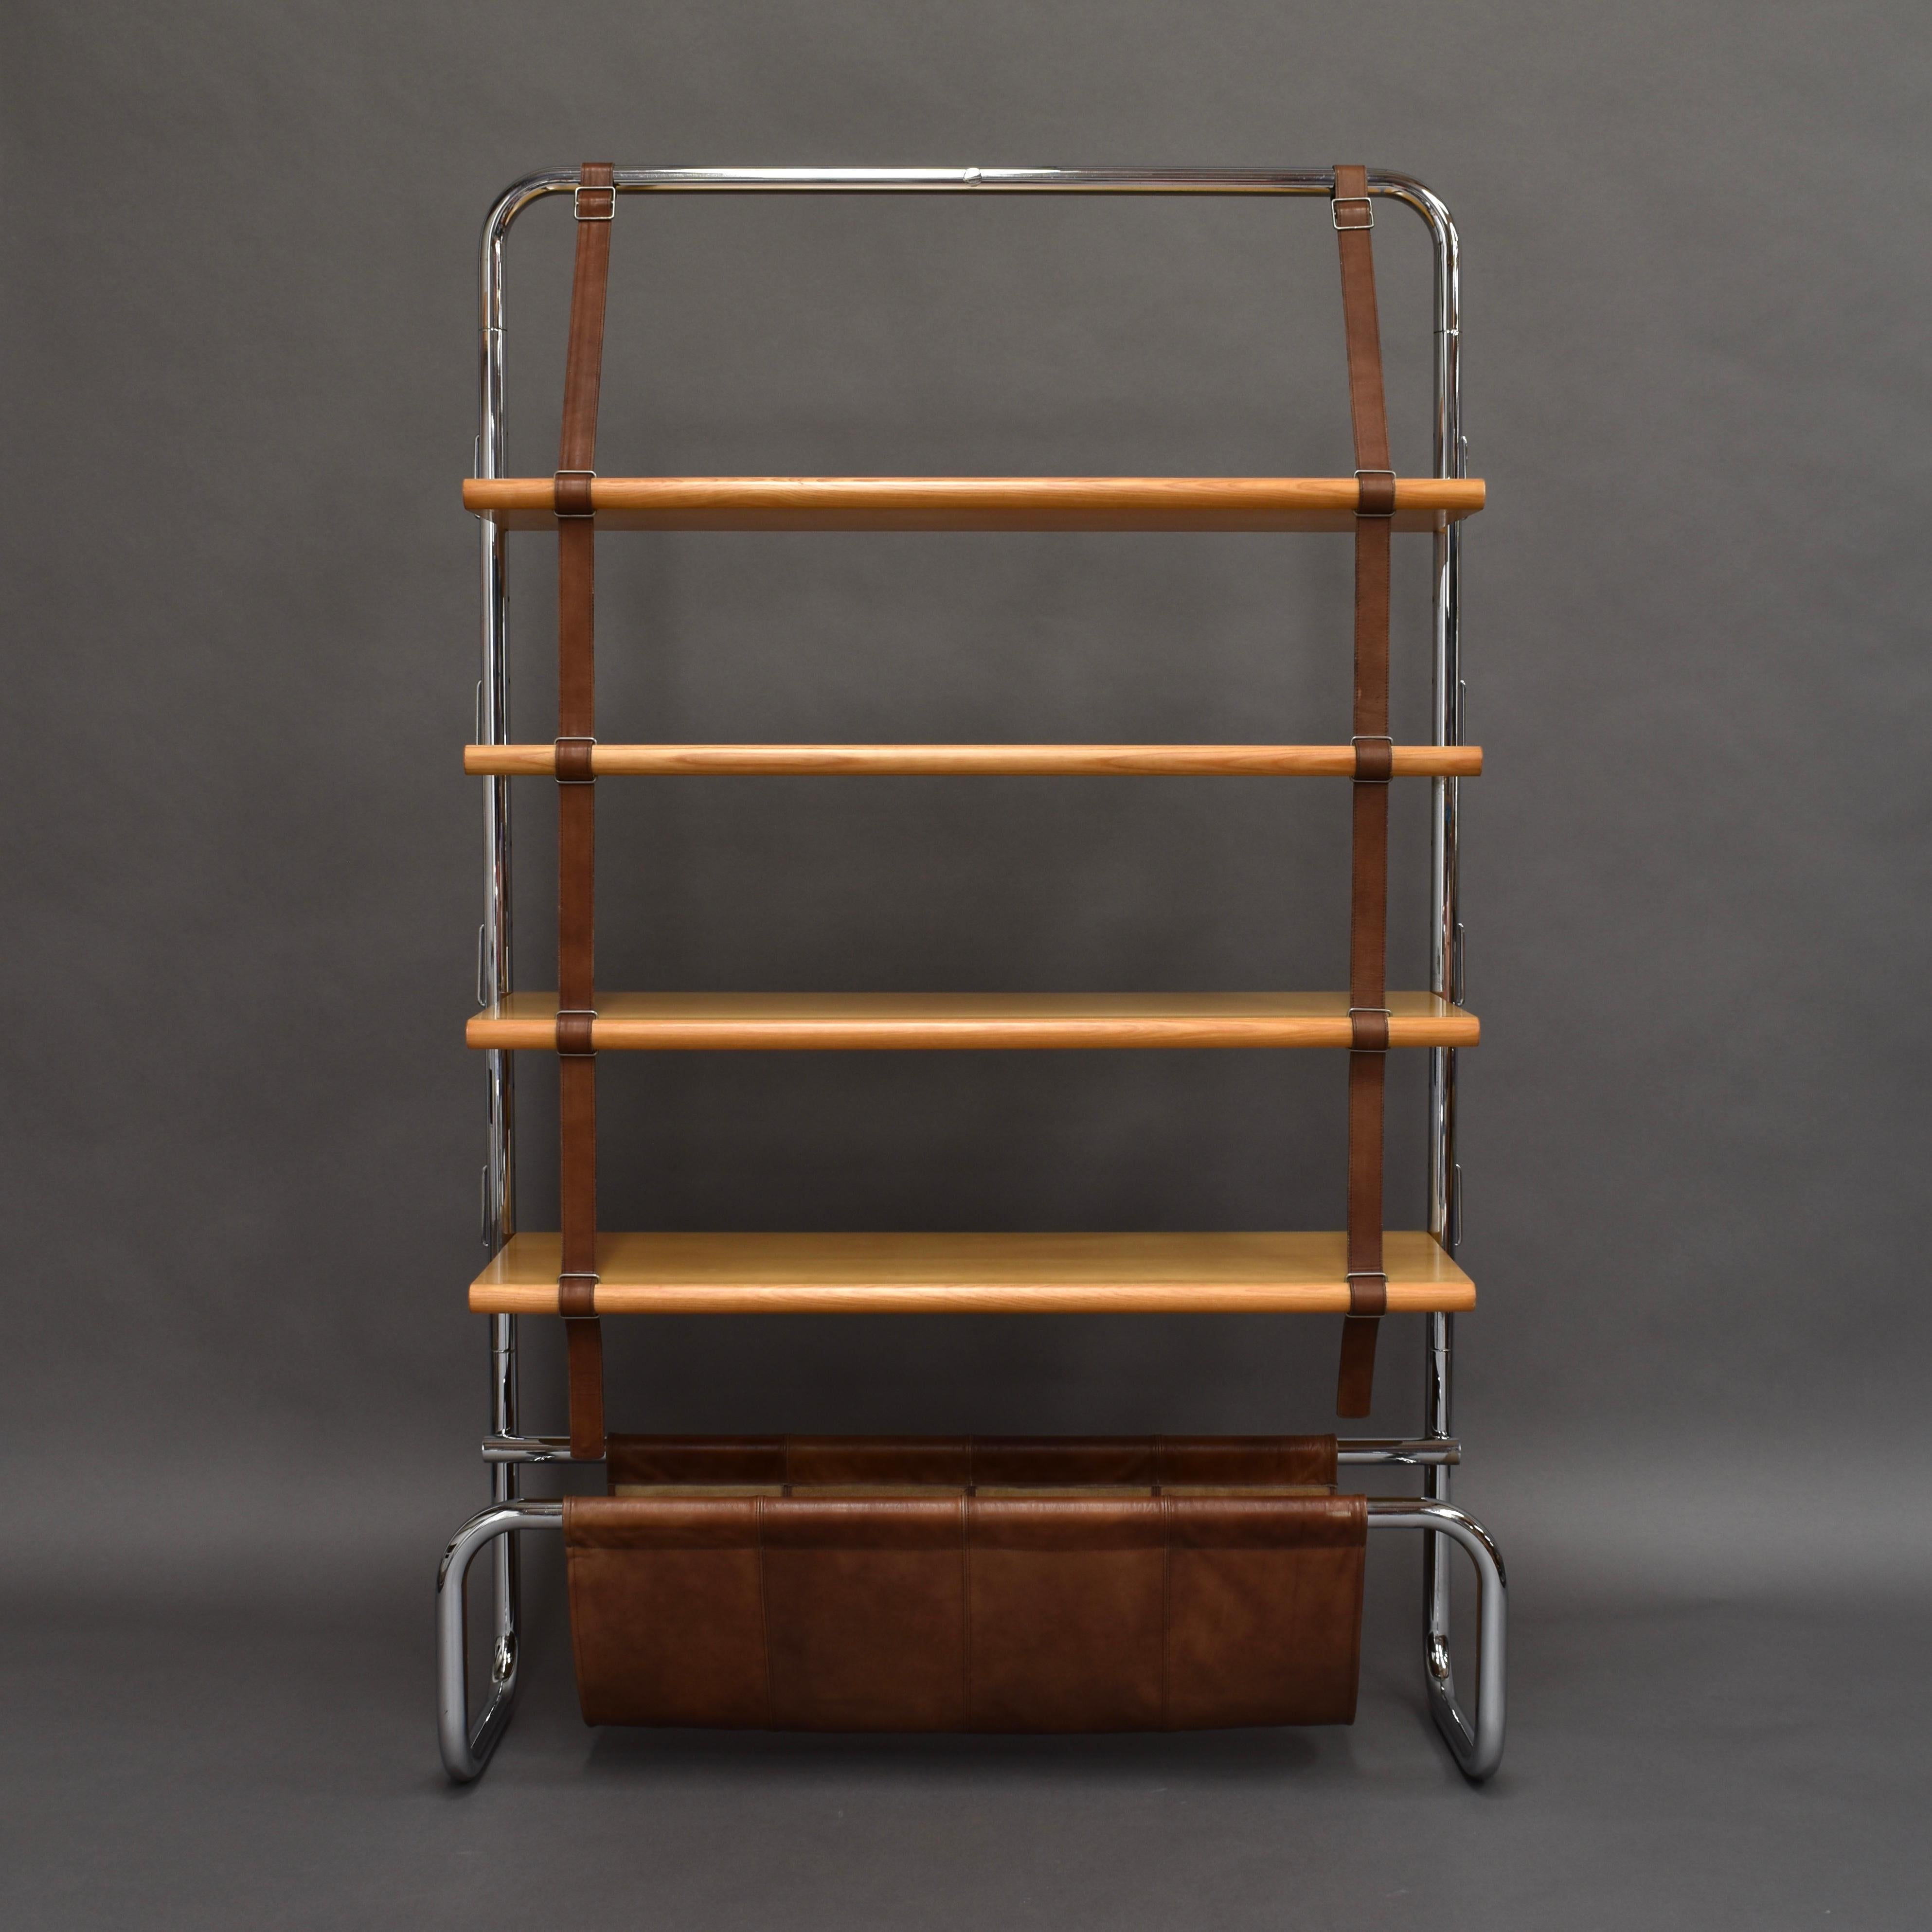 Extraordinary ‘Jumbo’ bookcase by Luigi Massoni for Poltrona Frau in Birch, chrome and leather, Italy, 1971.

This stunning bookshelf is very rare and features a tubular chrome frame, four Birch shelves, brown leather straps and leather magazine